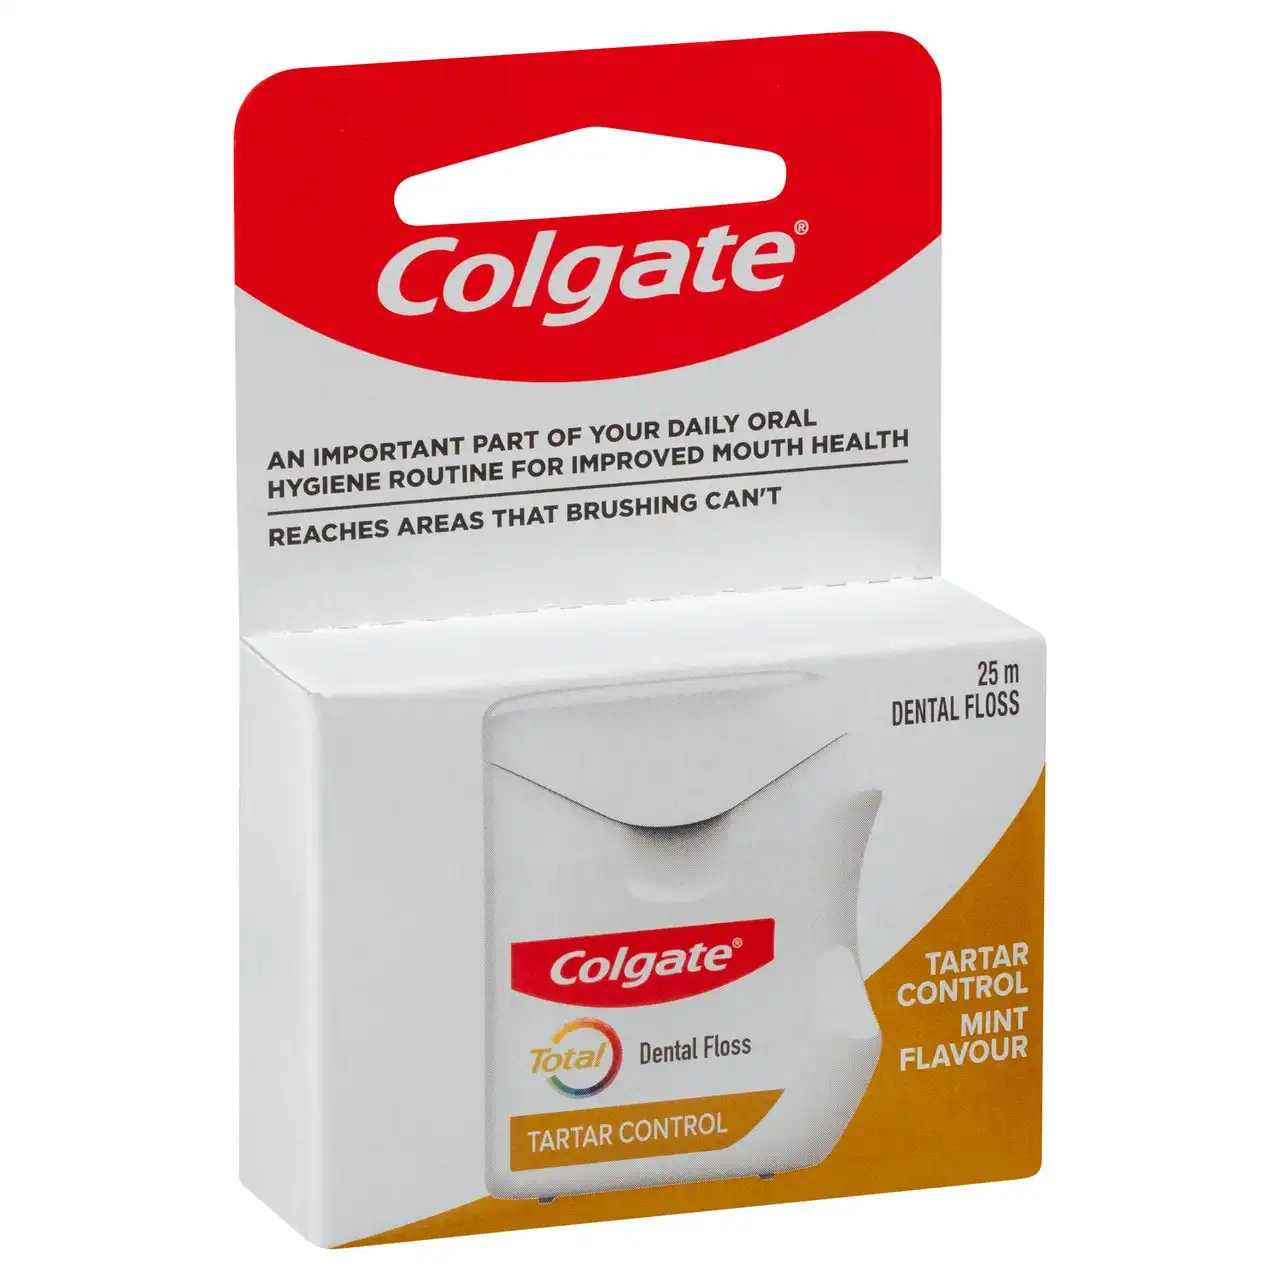 Colgate Total Tartar Control Dental Floss, 25m, Protects Gums & Helps Prevent Tooth Decay